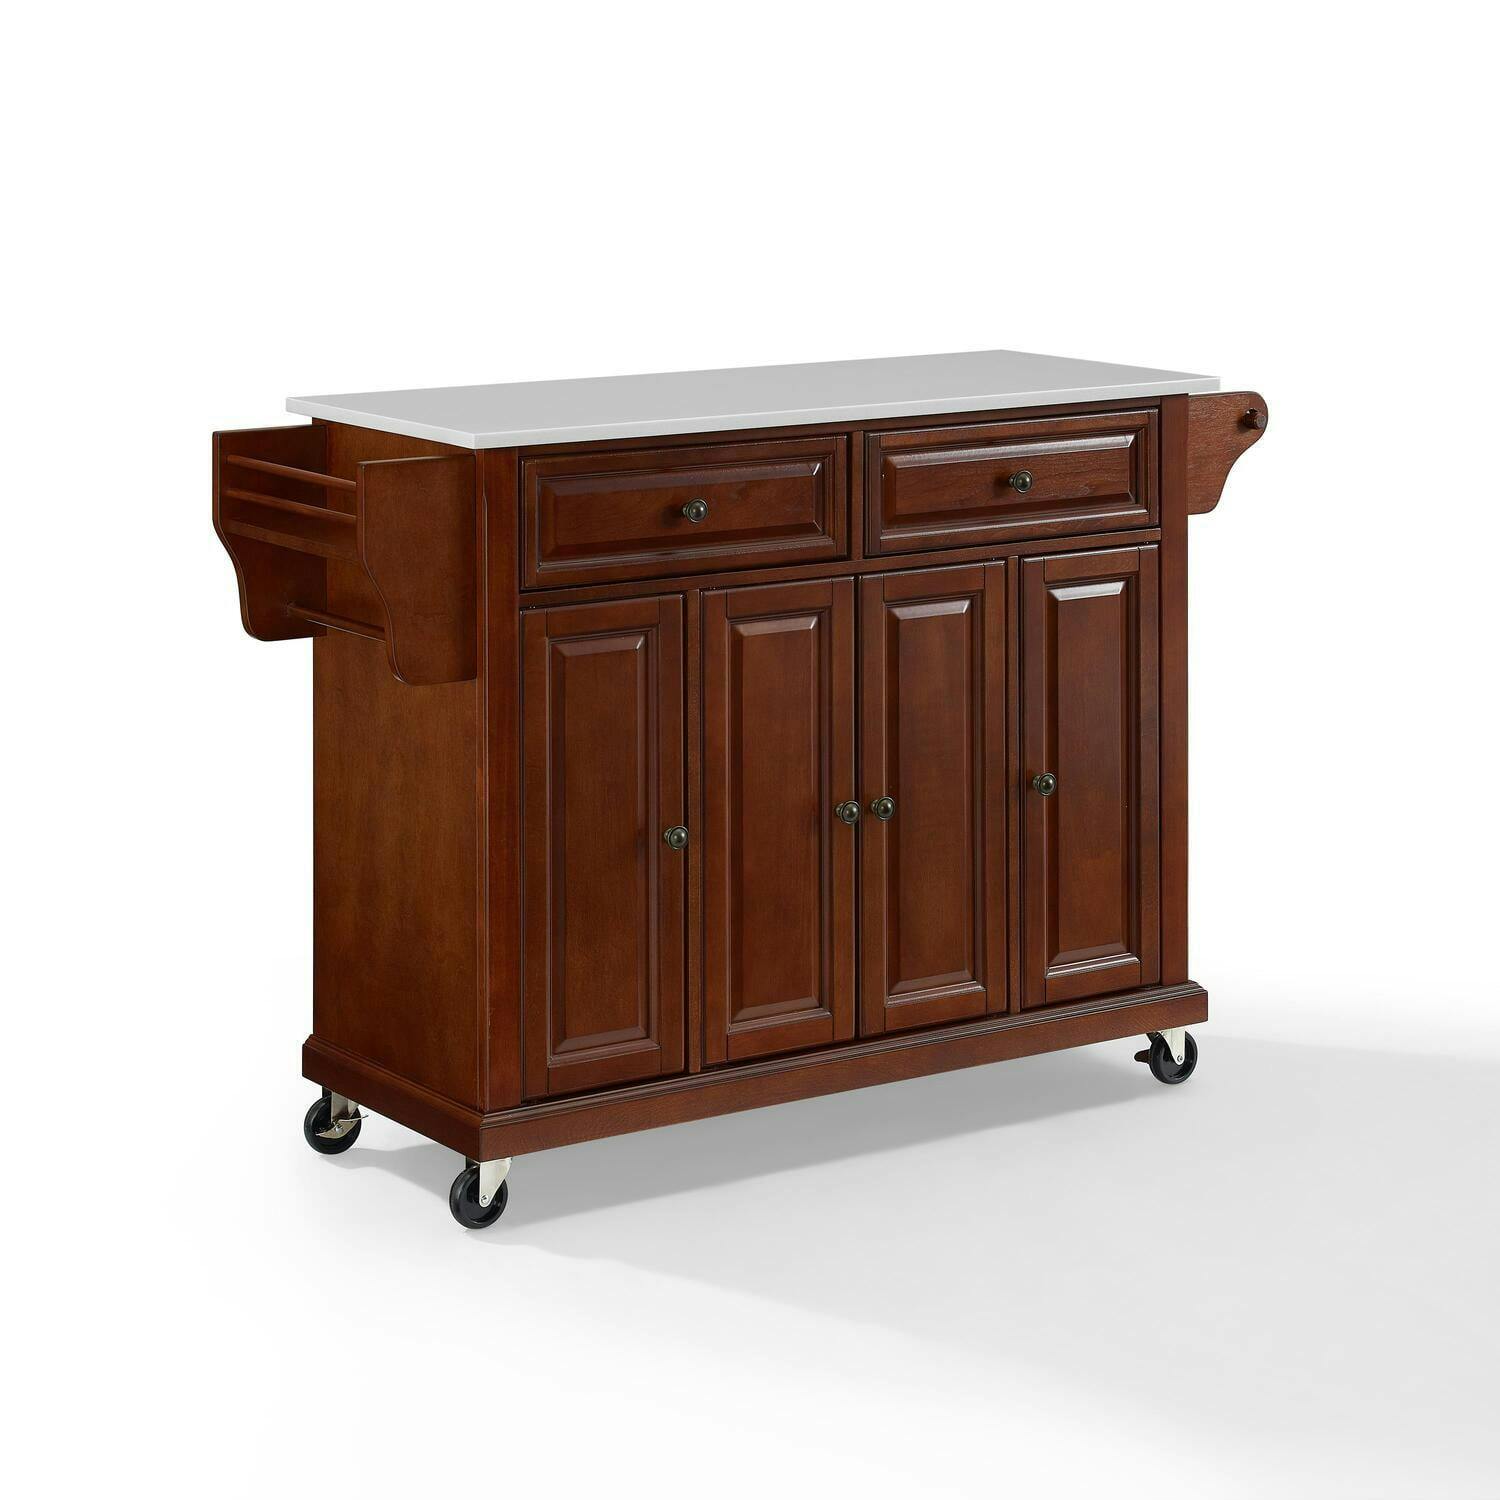 Granite Top Mahogany Kitchen Cart with Built-In Spice Rack